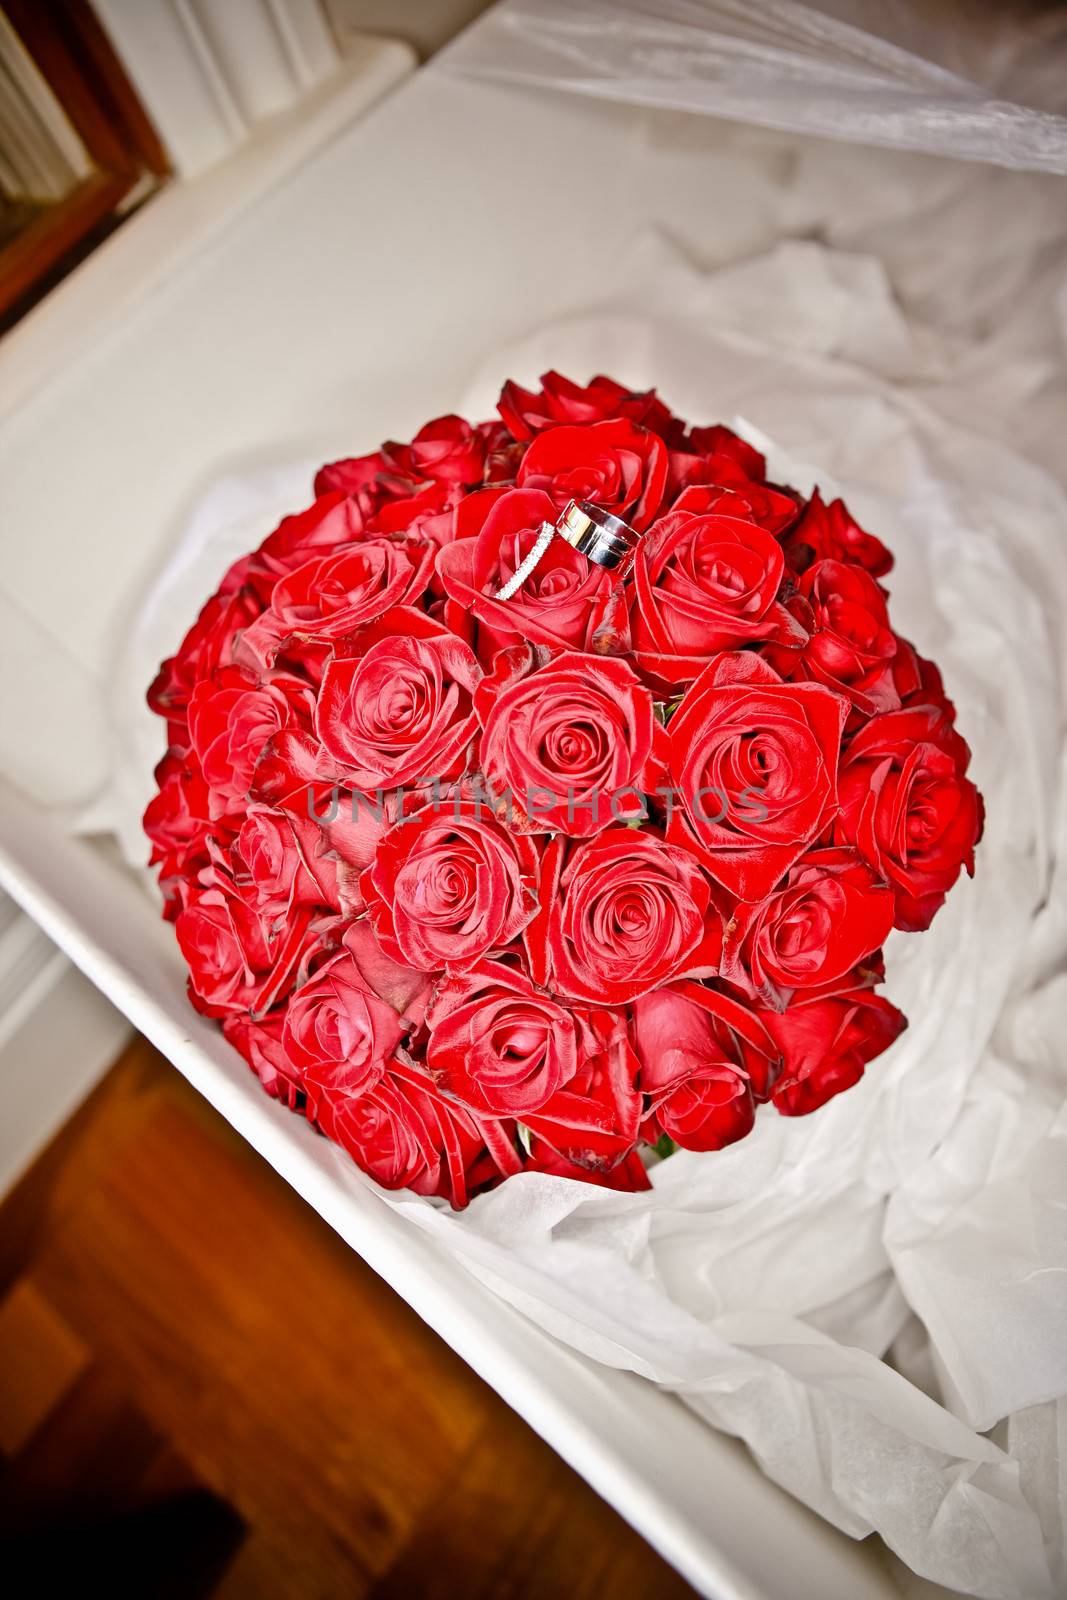 Wedding posy of beautiful fresh red roses with the rings balanced on top nestling in tissue paper